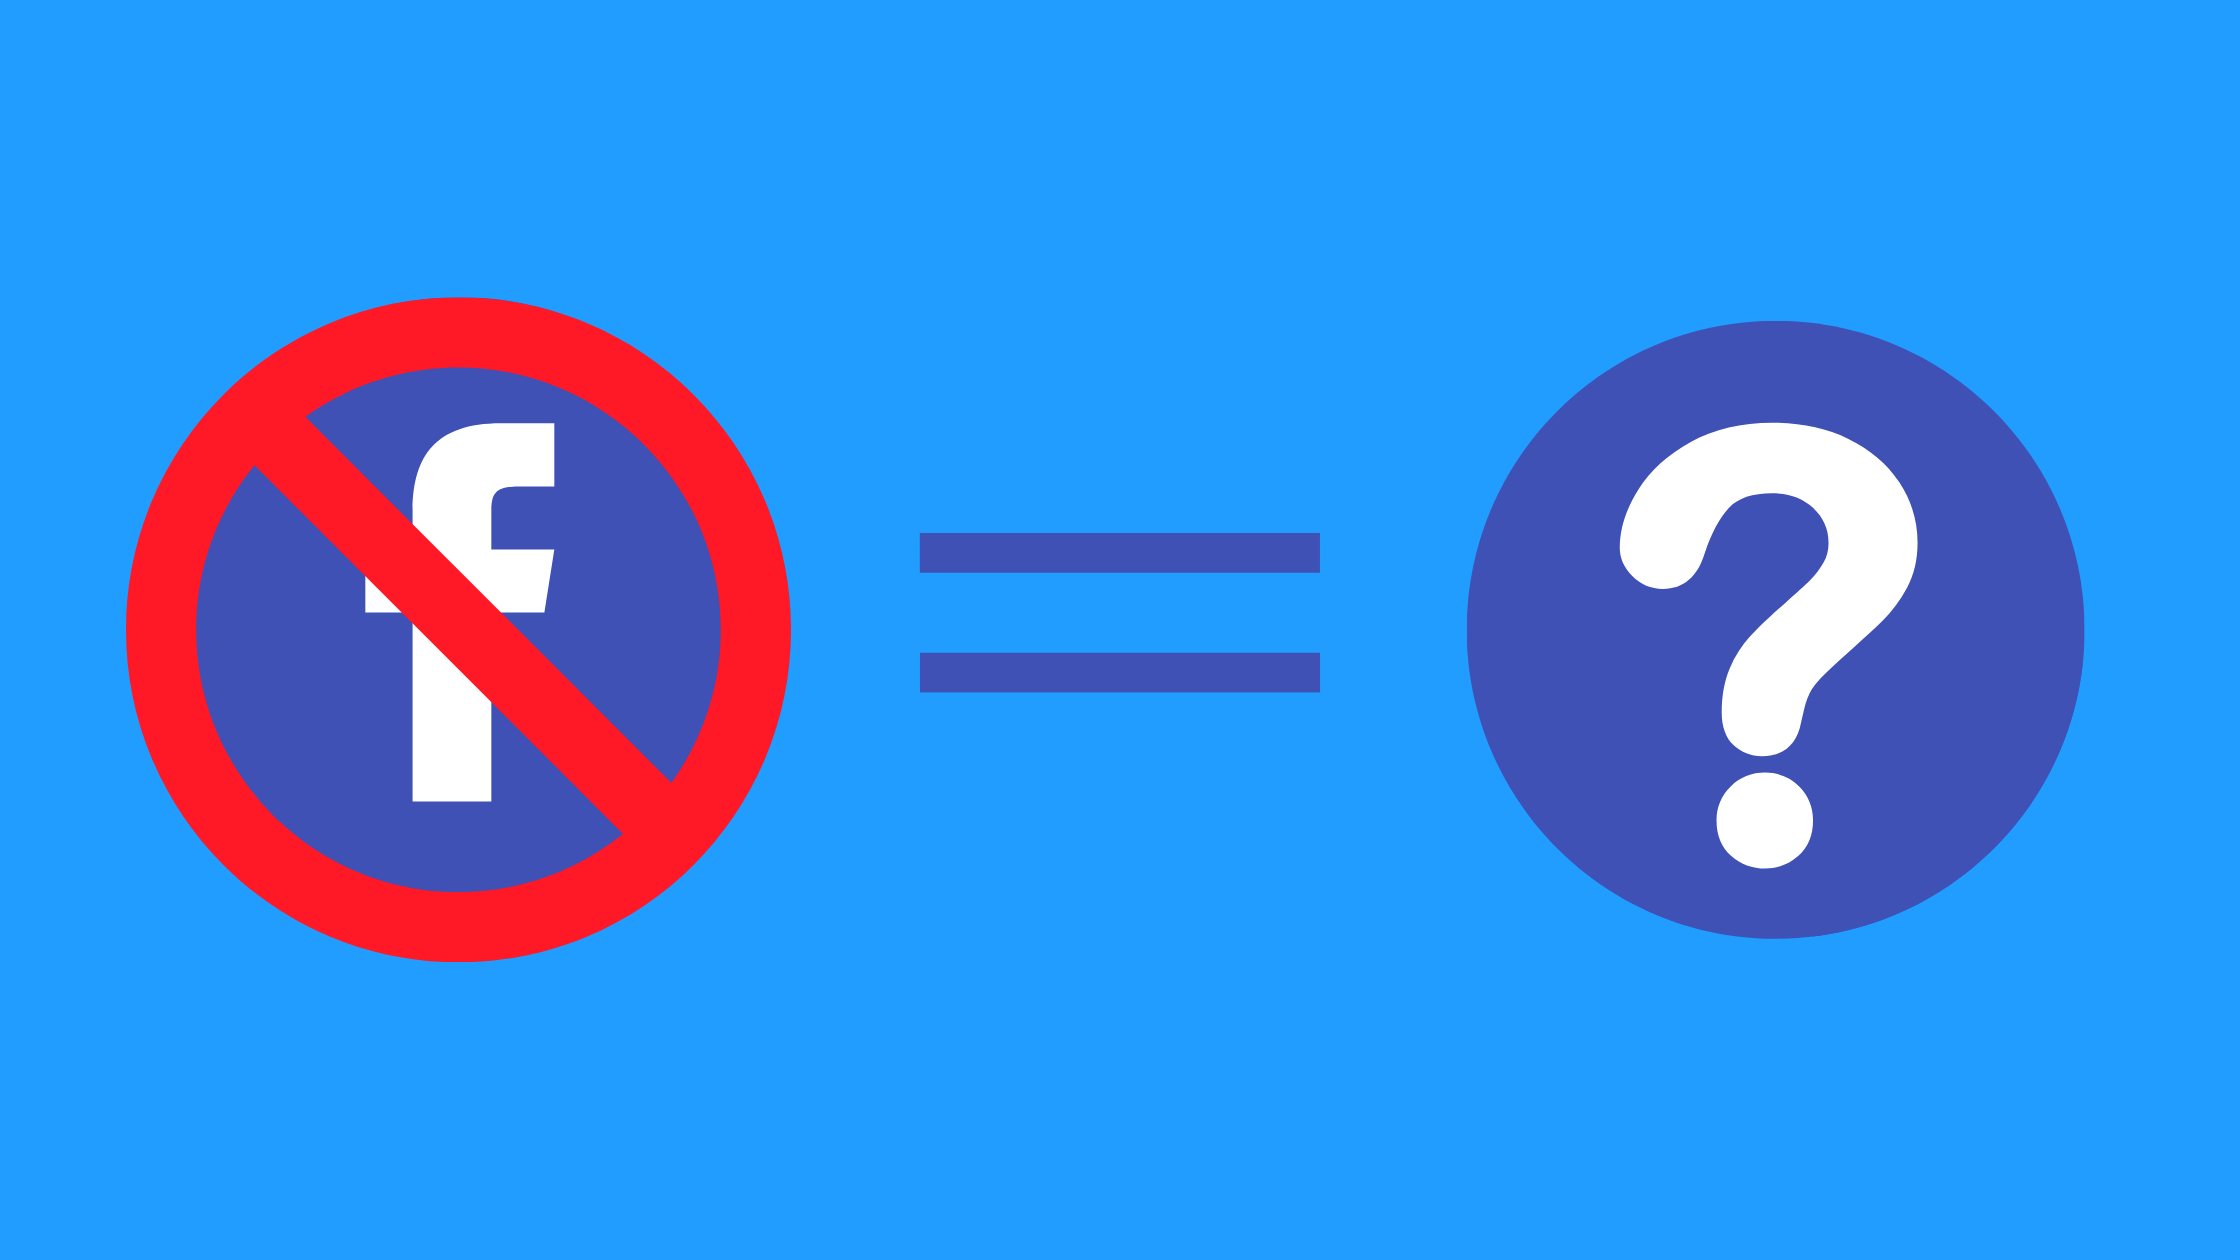 One week after #FacebookDown—what did we learn?